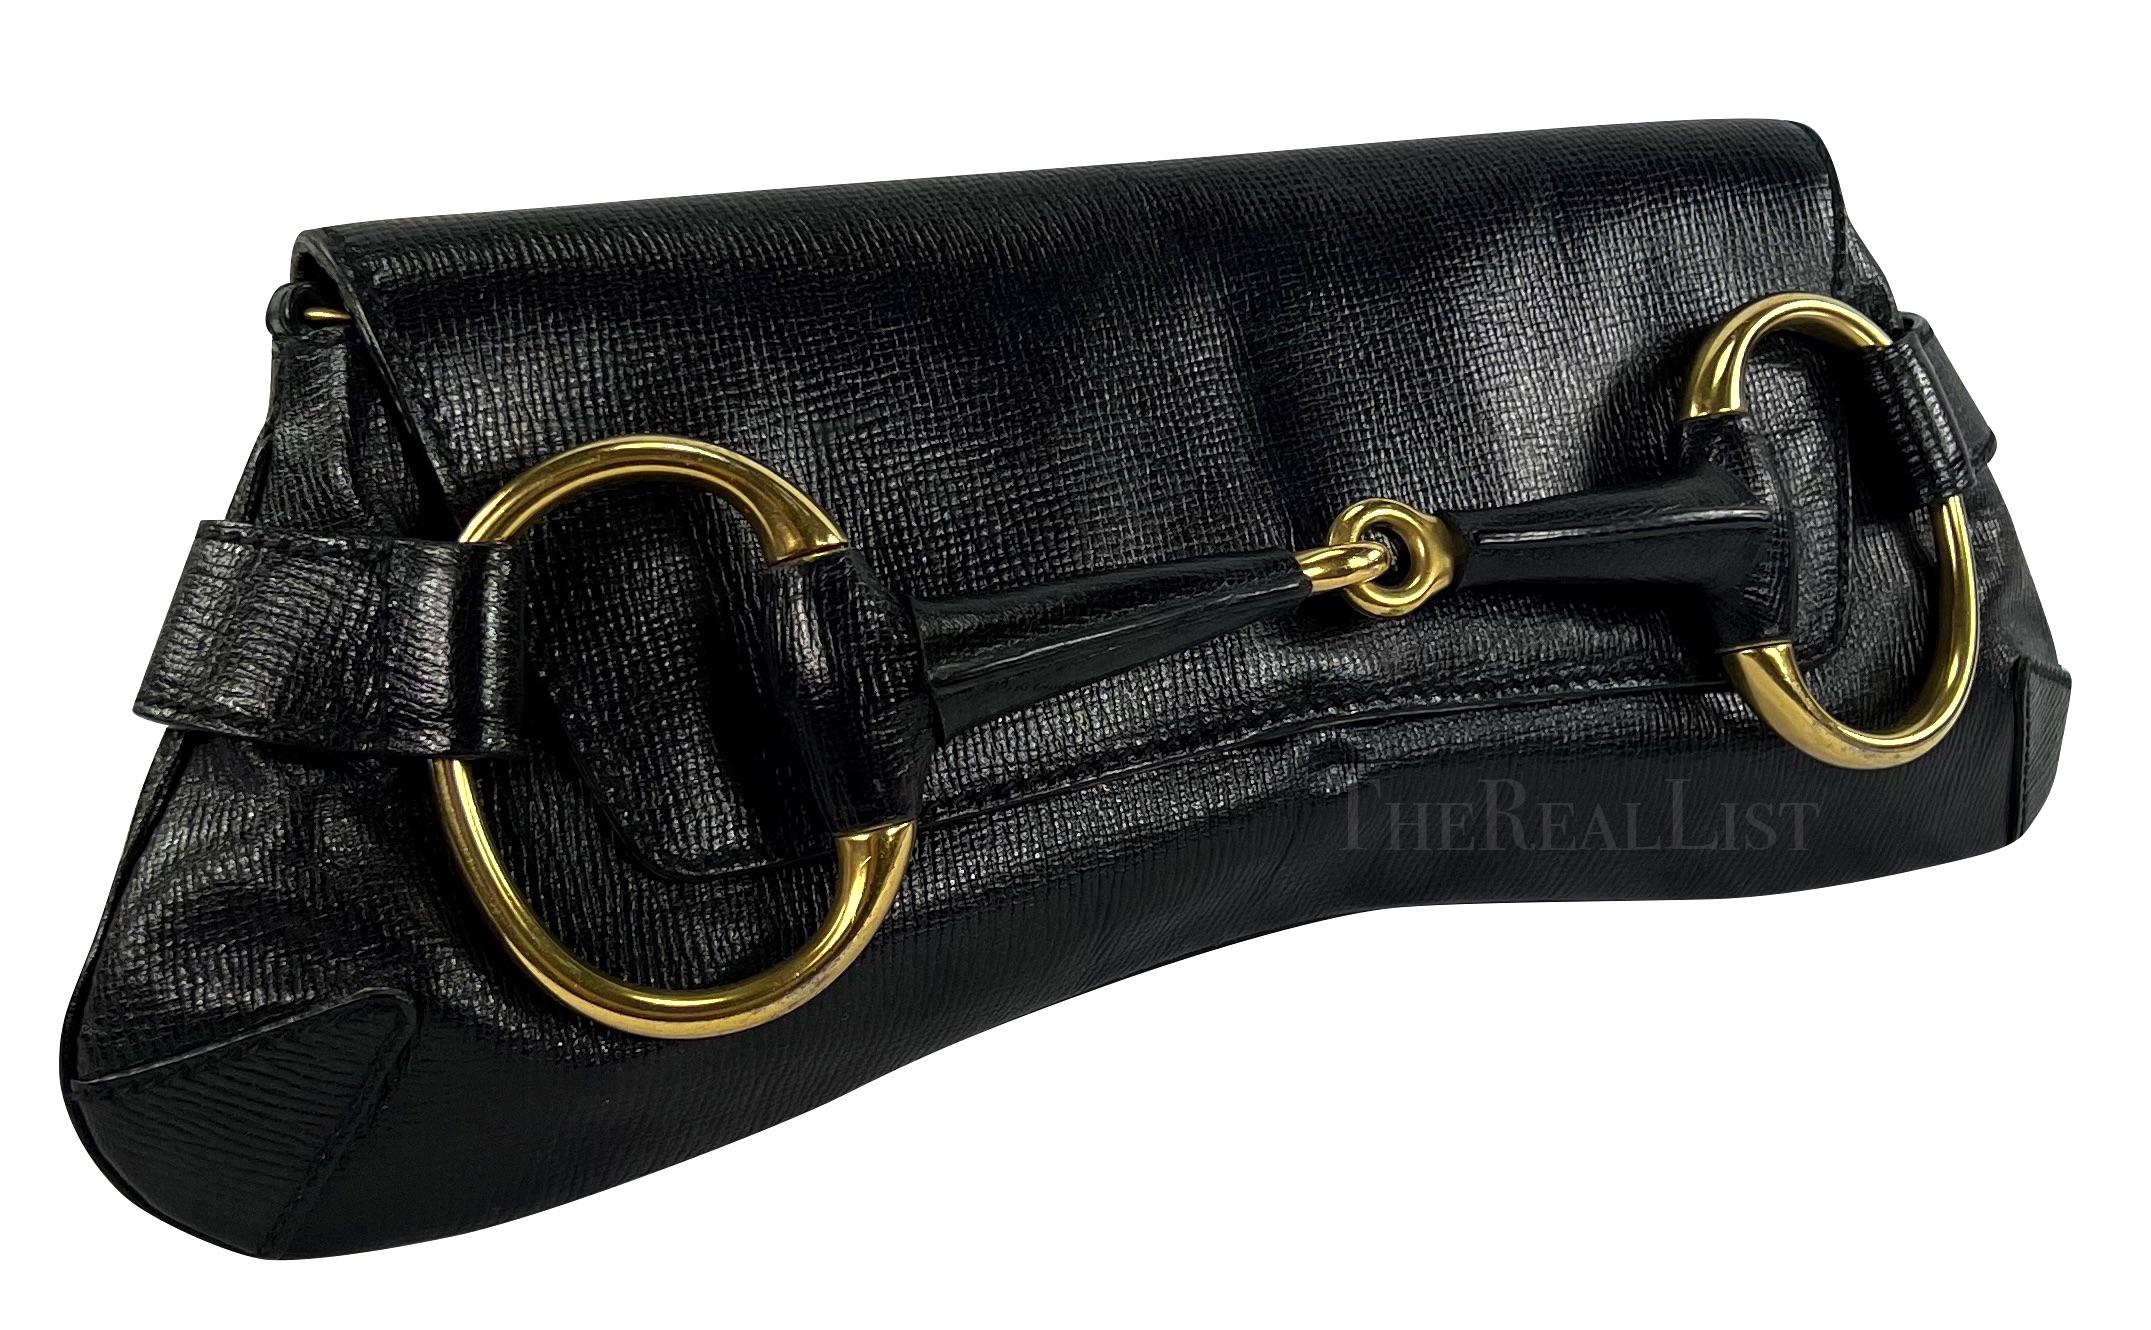 TheRealList presents: a fabulous black leather embossed Gucci horse bit clutch, designed by Tom Ford. From the early 2000s, the bag's horse bit-style silhouette, expertly crafted from exquisite leather, is adorned with a captivating flap and a